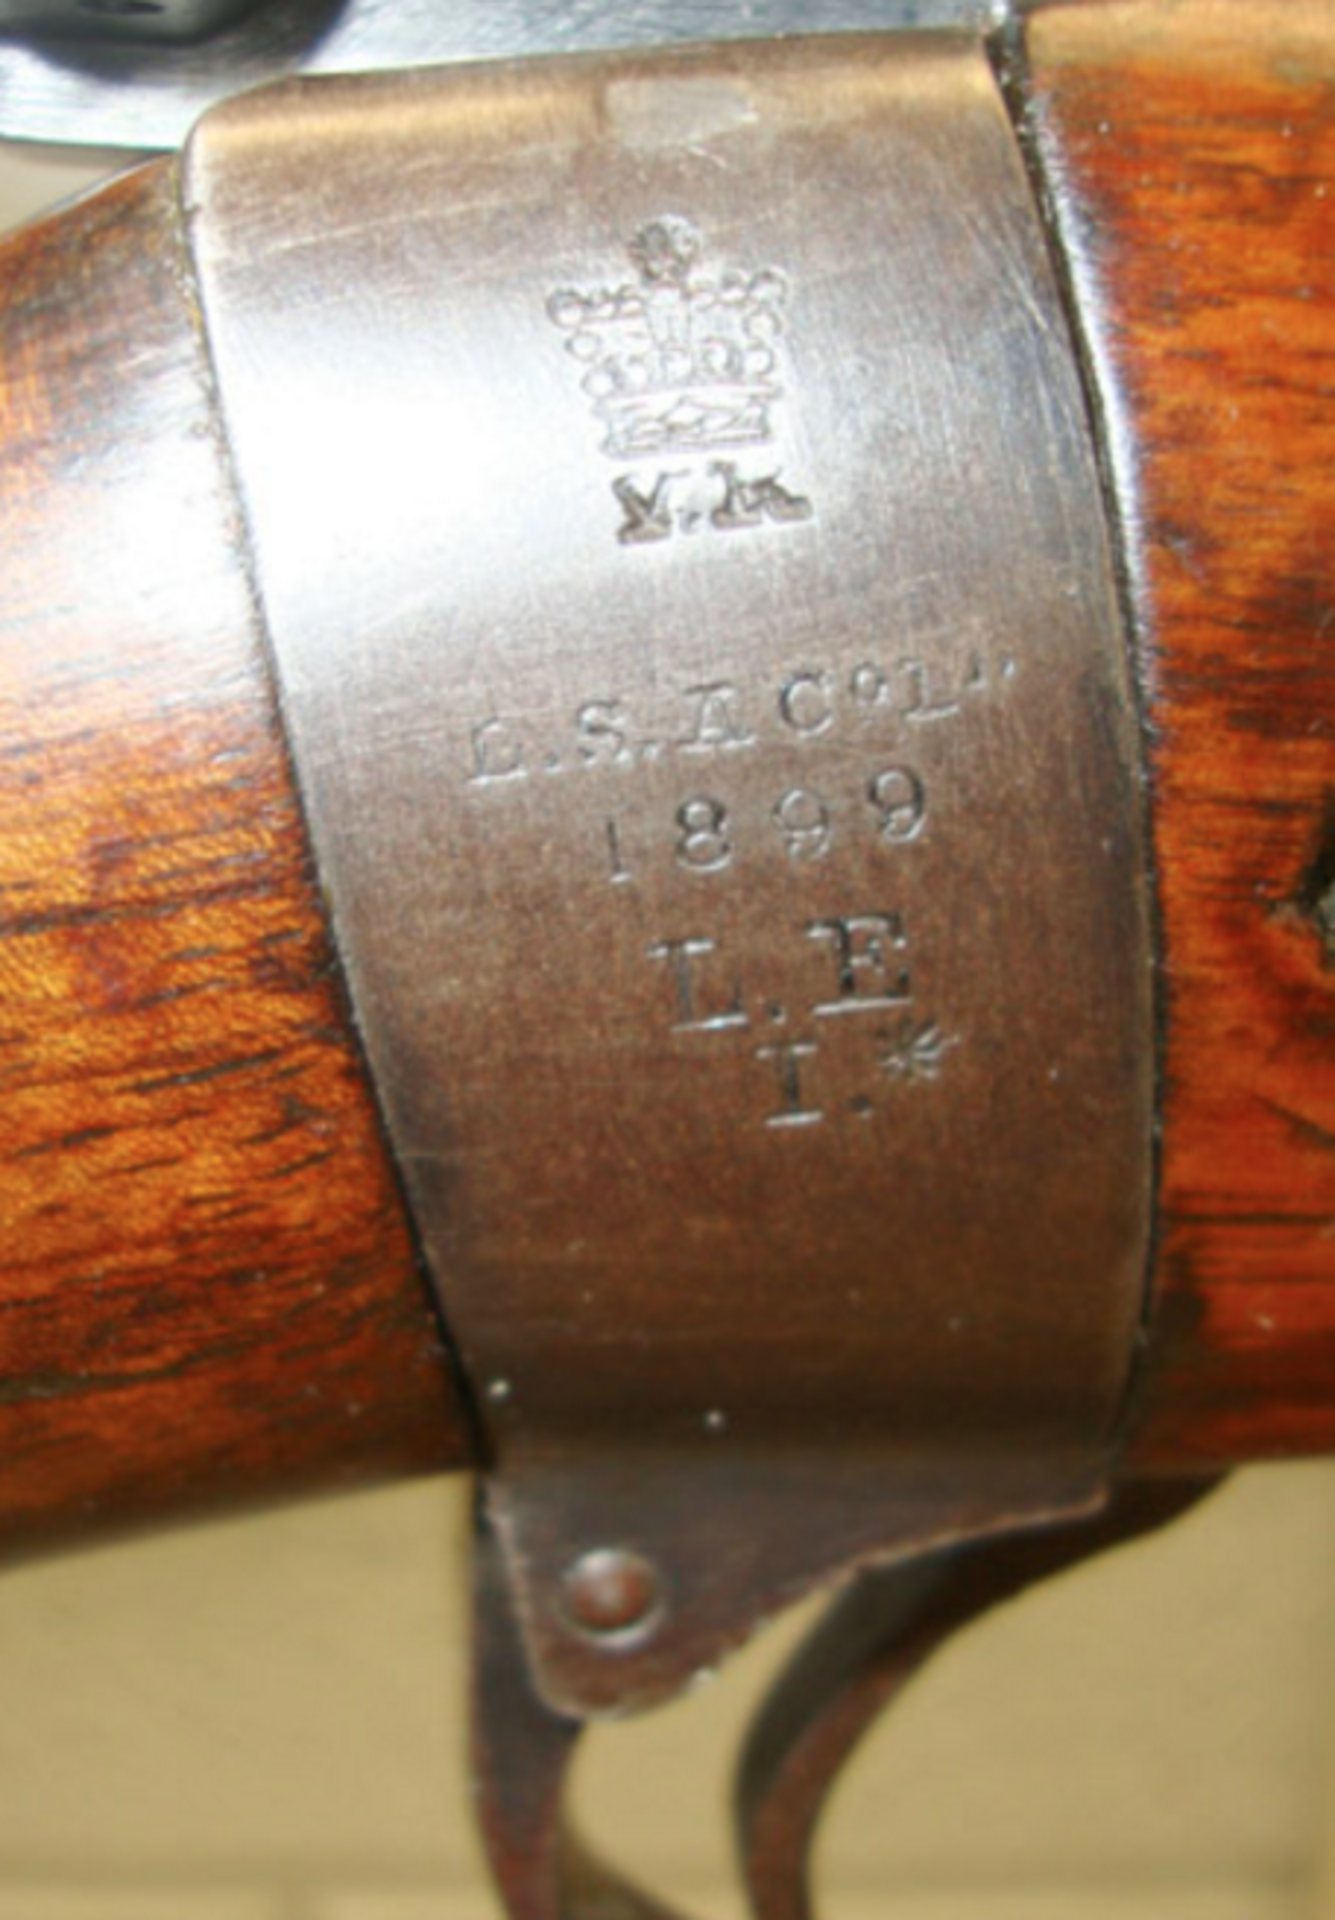 MINT, Boer War 1899 Dated , Long Lee Enfield Rifle LSA Co Ltd & BSA Marked With South African Marks - Image 2 of 3